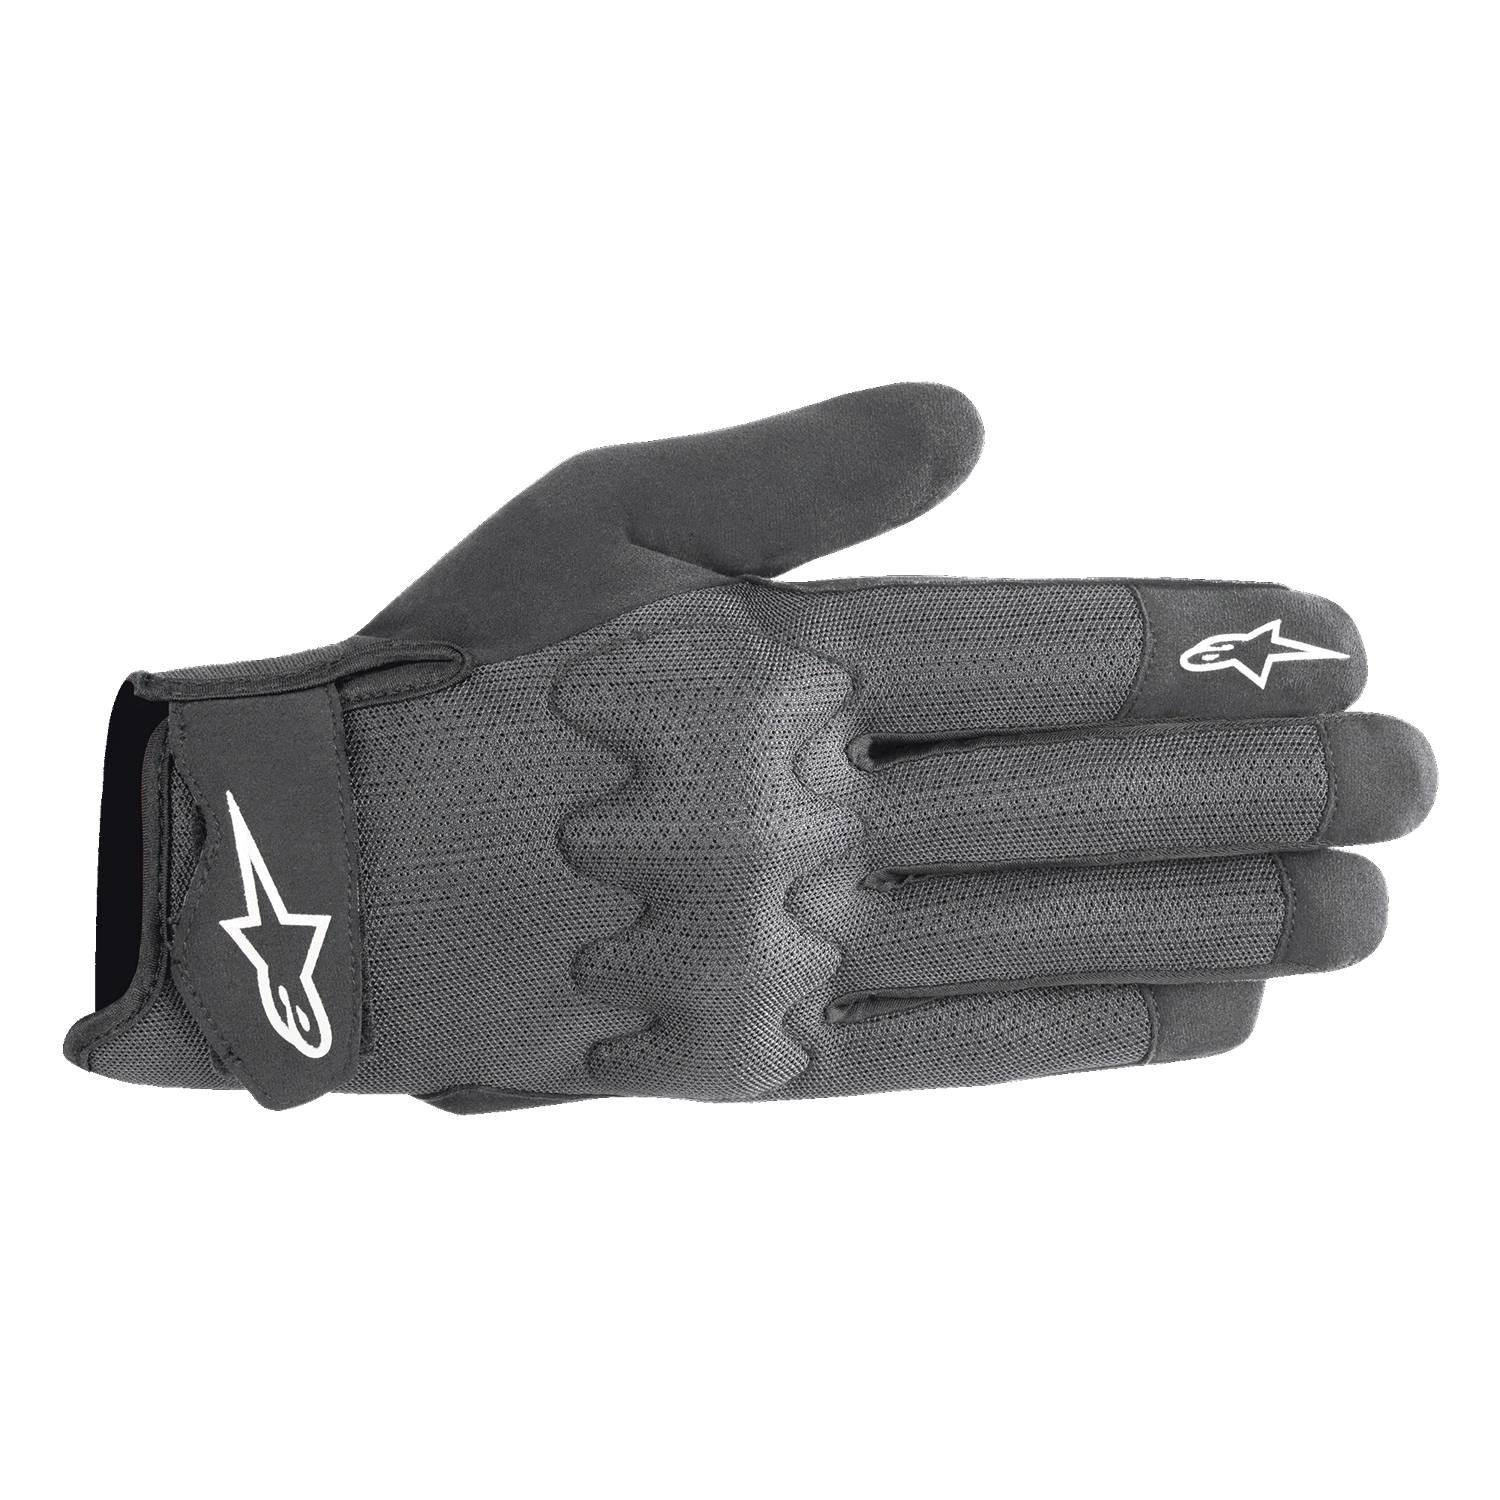 Image of Alpinestars Stated Air Gloves Black Silver Size S ID 8059347168647